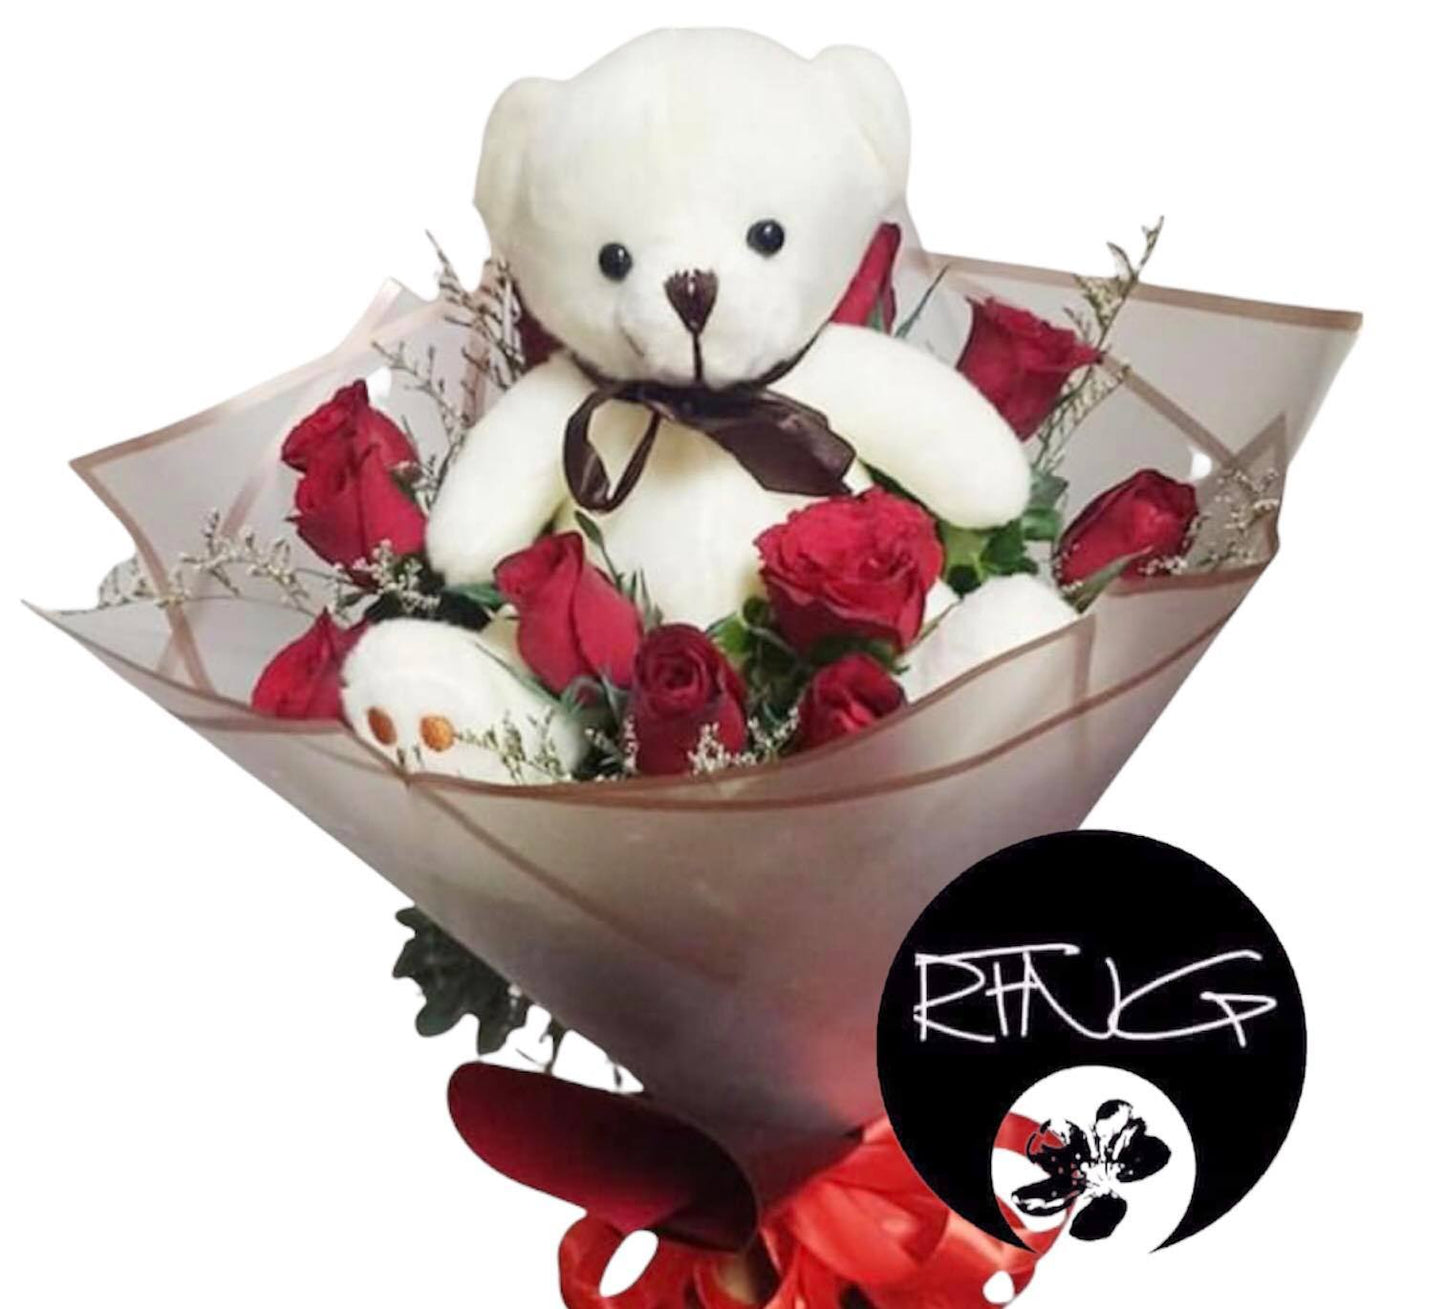 1 dz. Roses and Teddy - Redflowersngifts.com